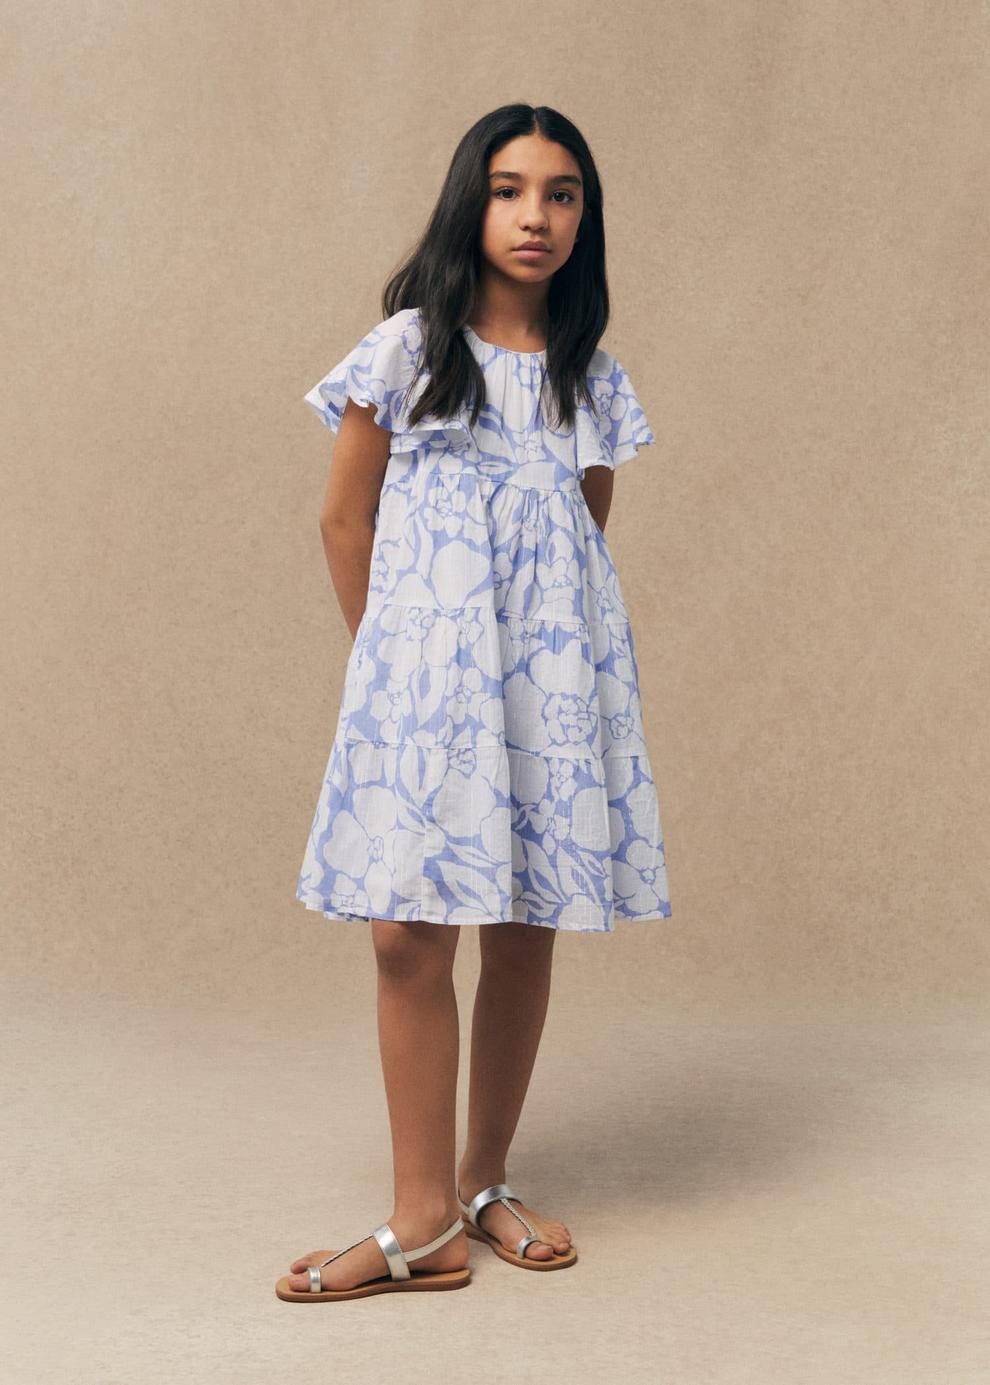 Printed cotton dress offers at S$ 59.9 in Mango Kids